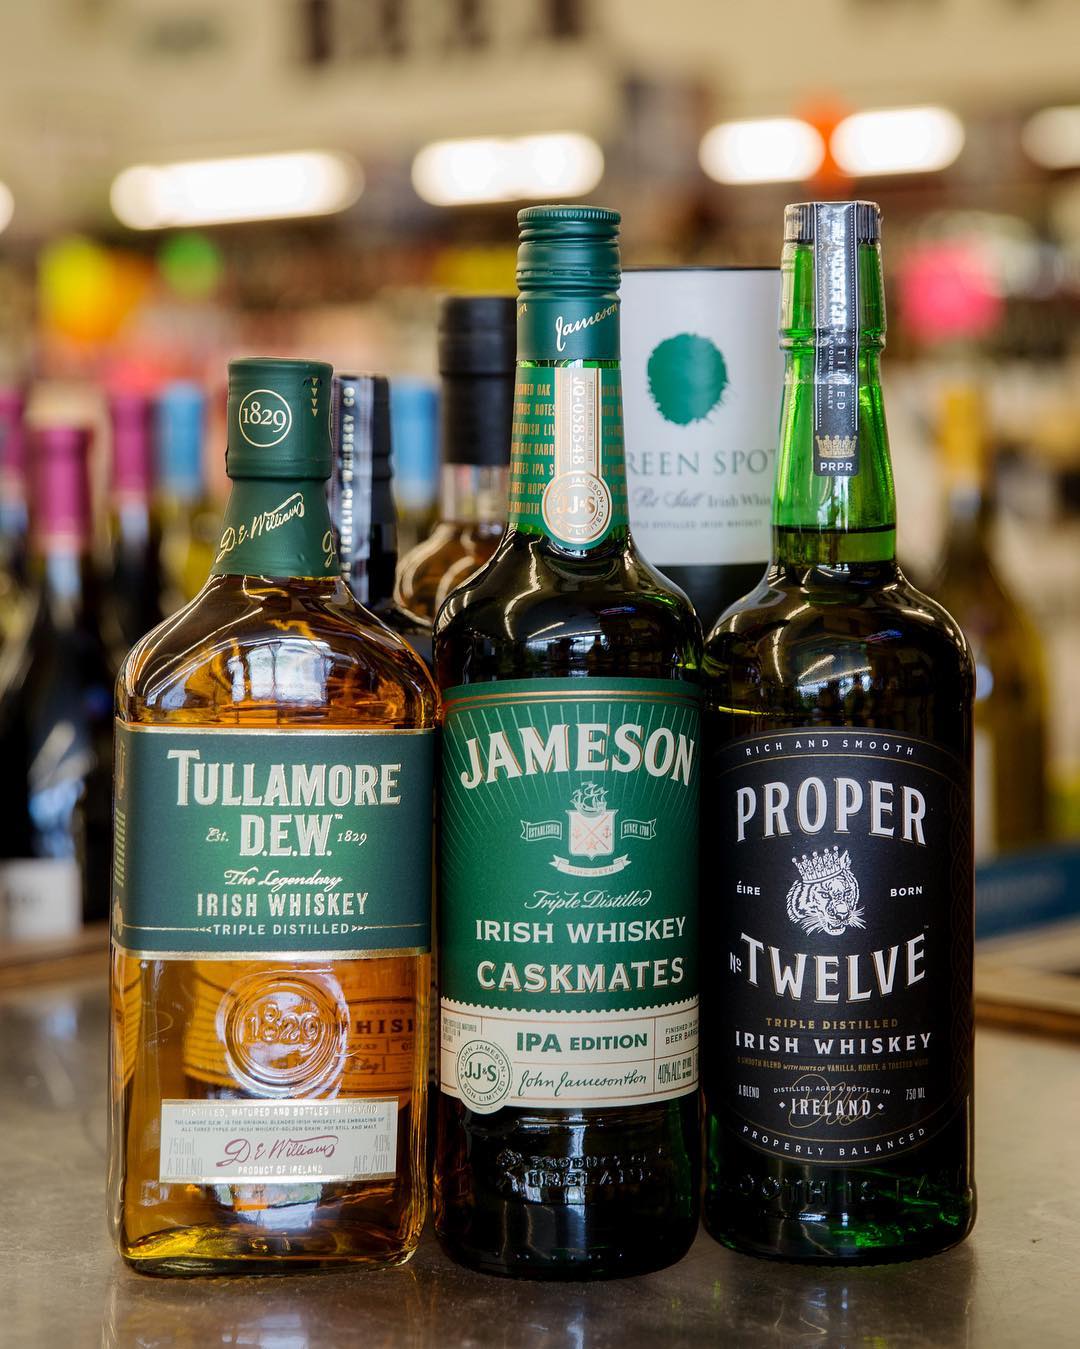 Come browse Calandro’s extensive whiskey selection before the #stpattysday festivities this weekend. We’ve got these…